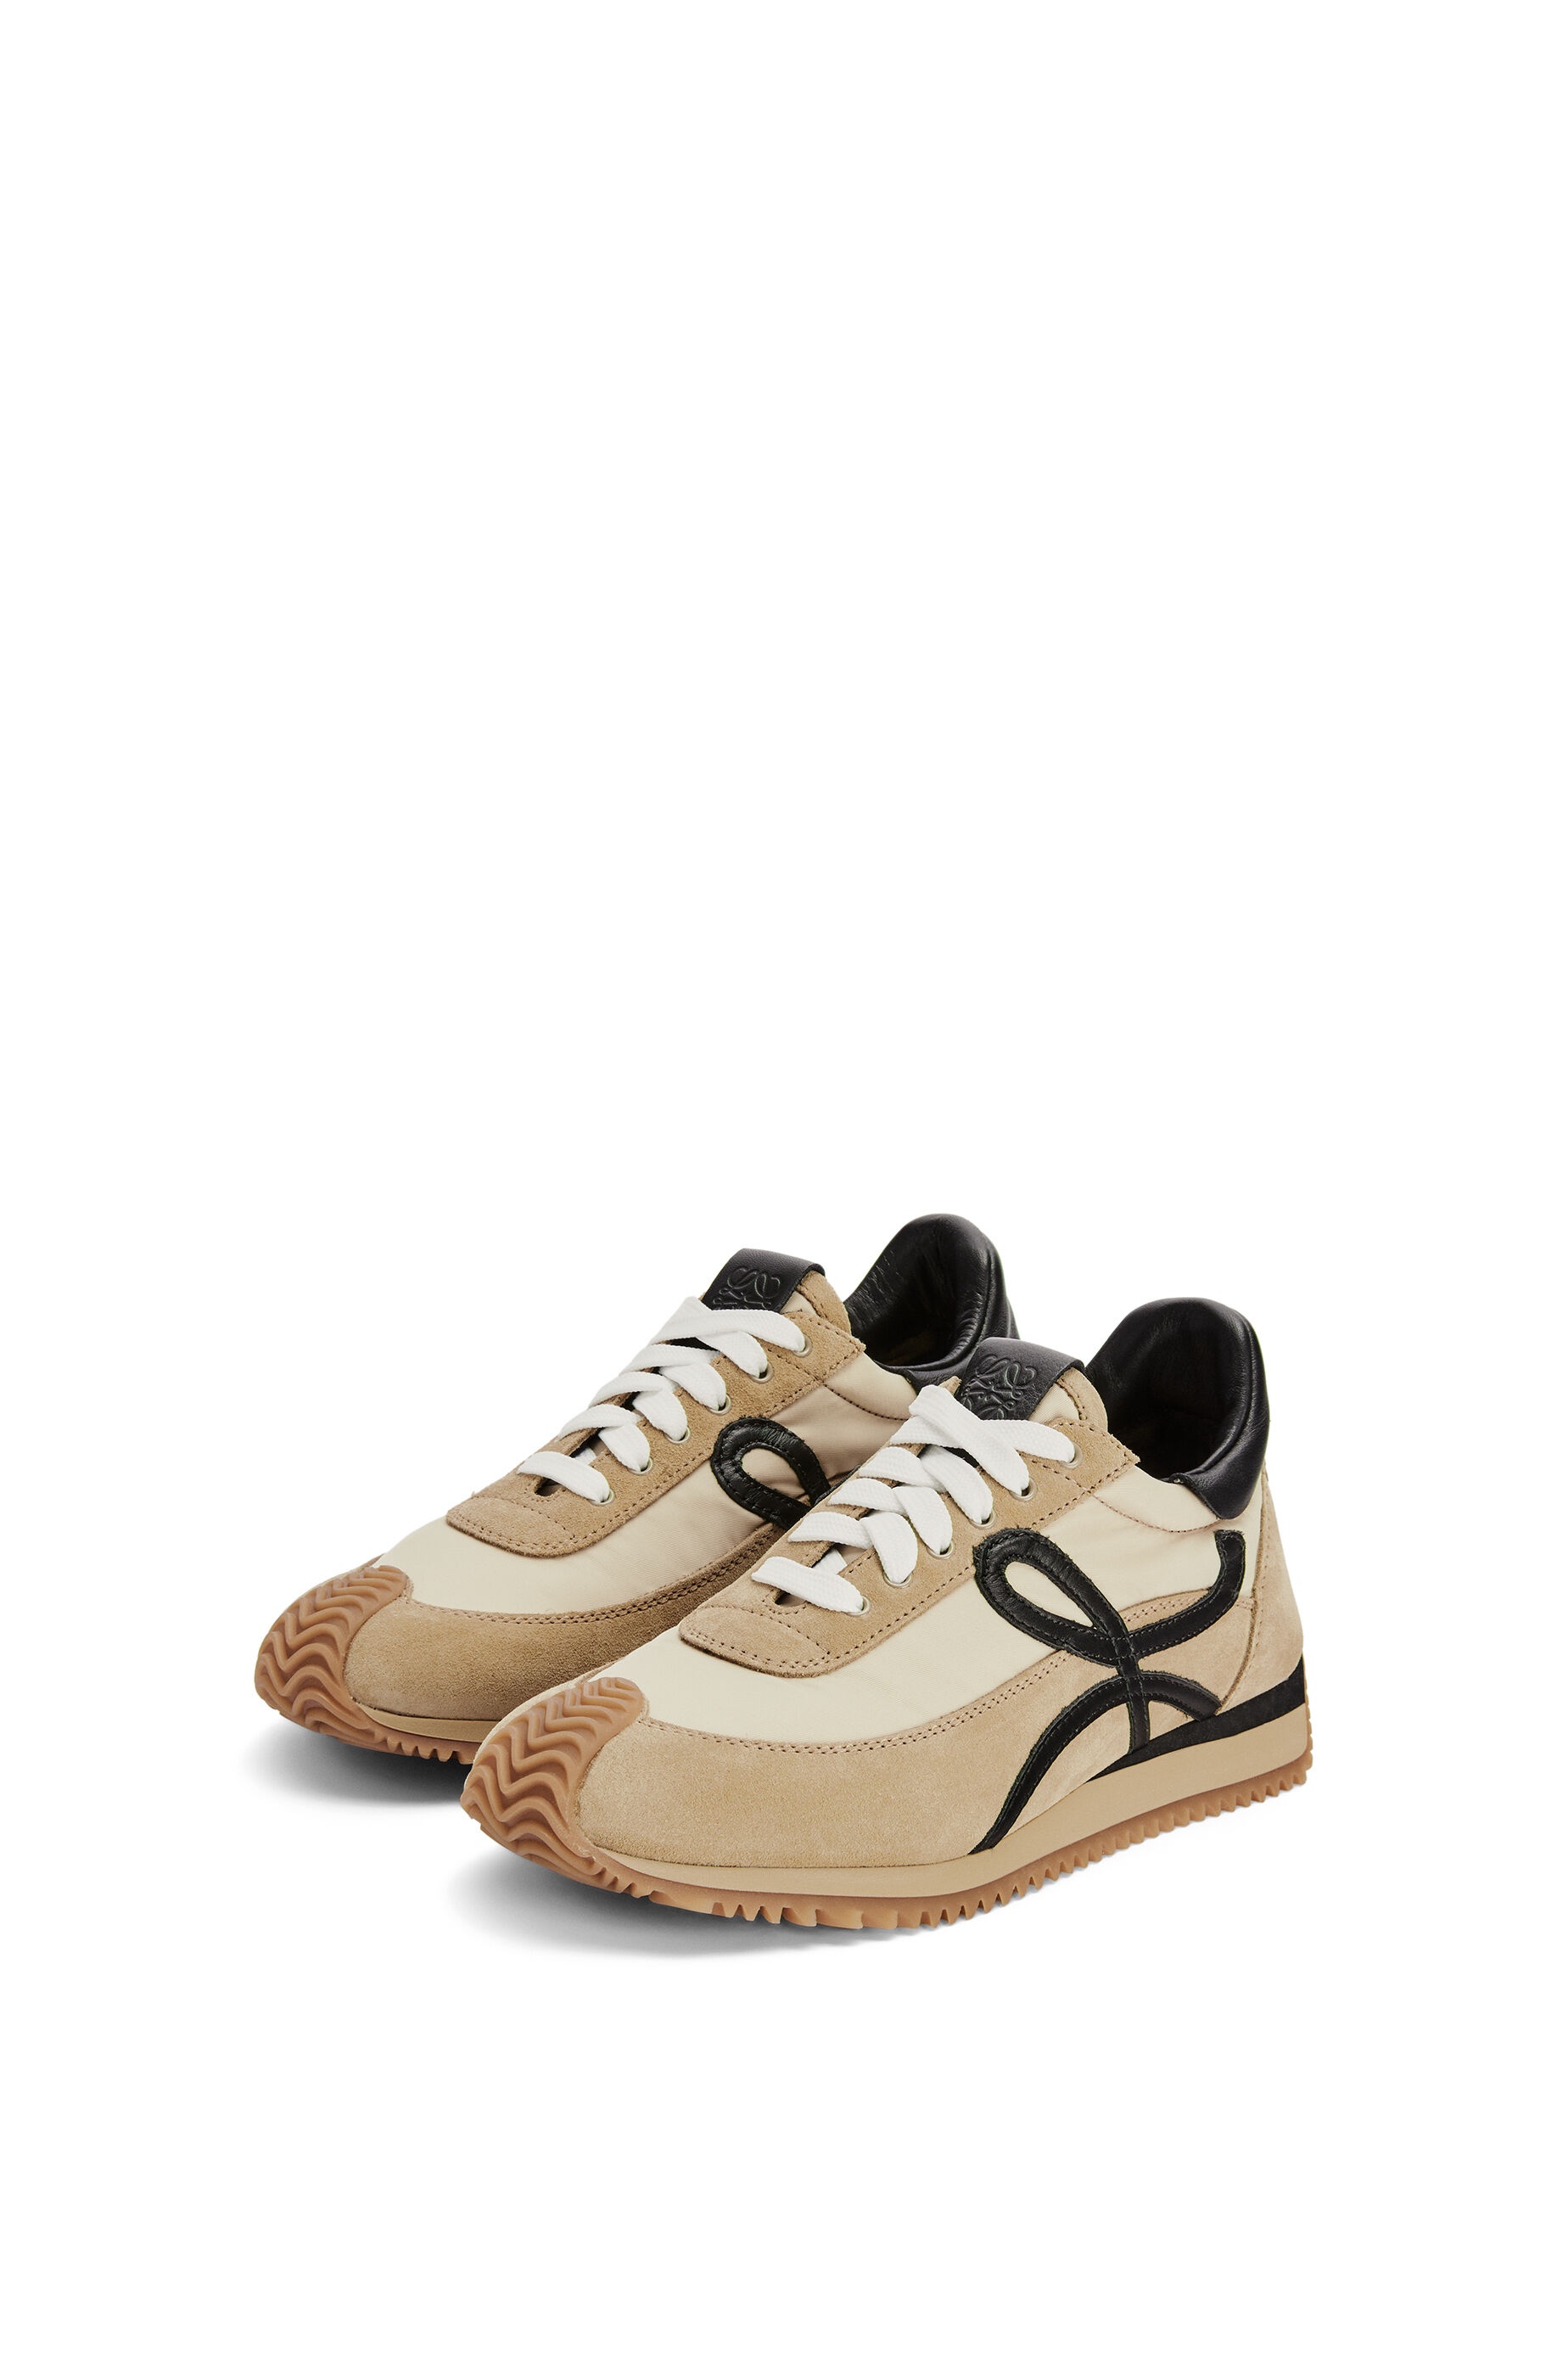 Flow Runner in nylon and suede - 6